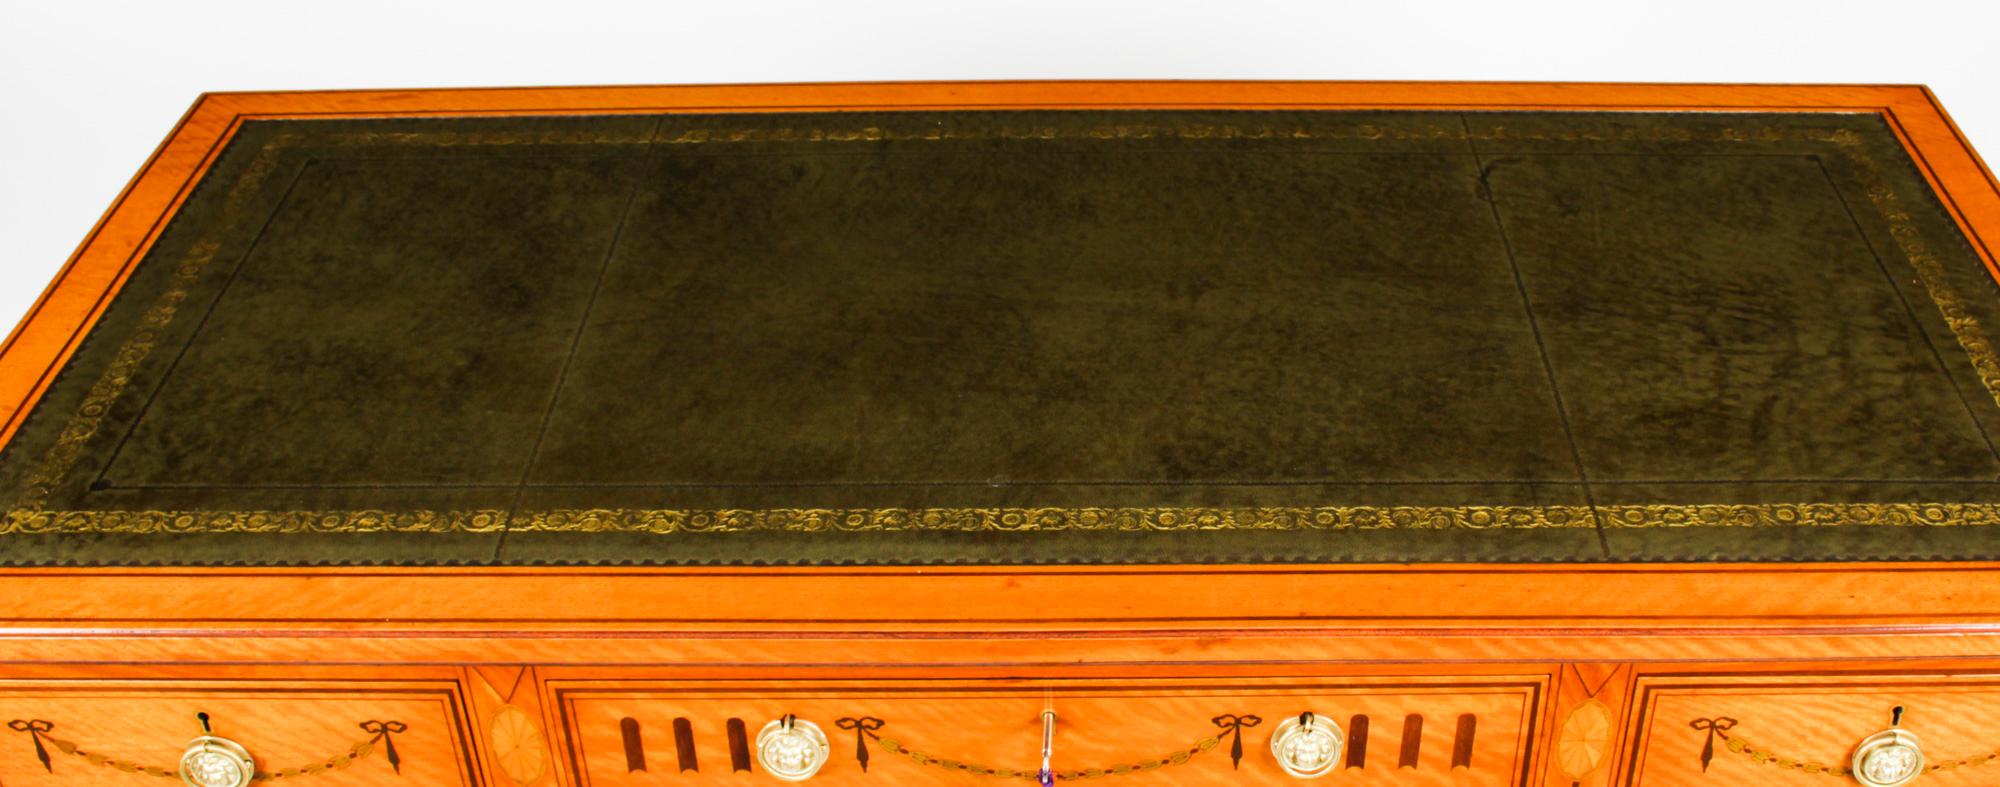 Antique Inlaid Satinwood Writing Table Desk by Edwards & Roberts, 19th Century For Sale 4